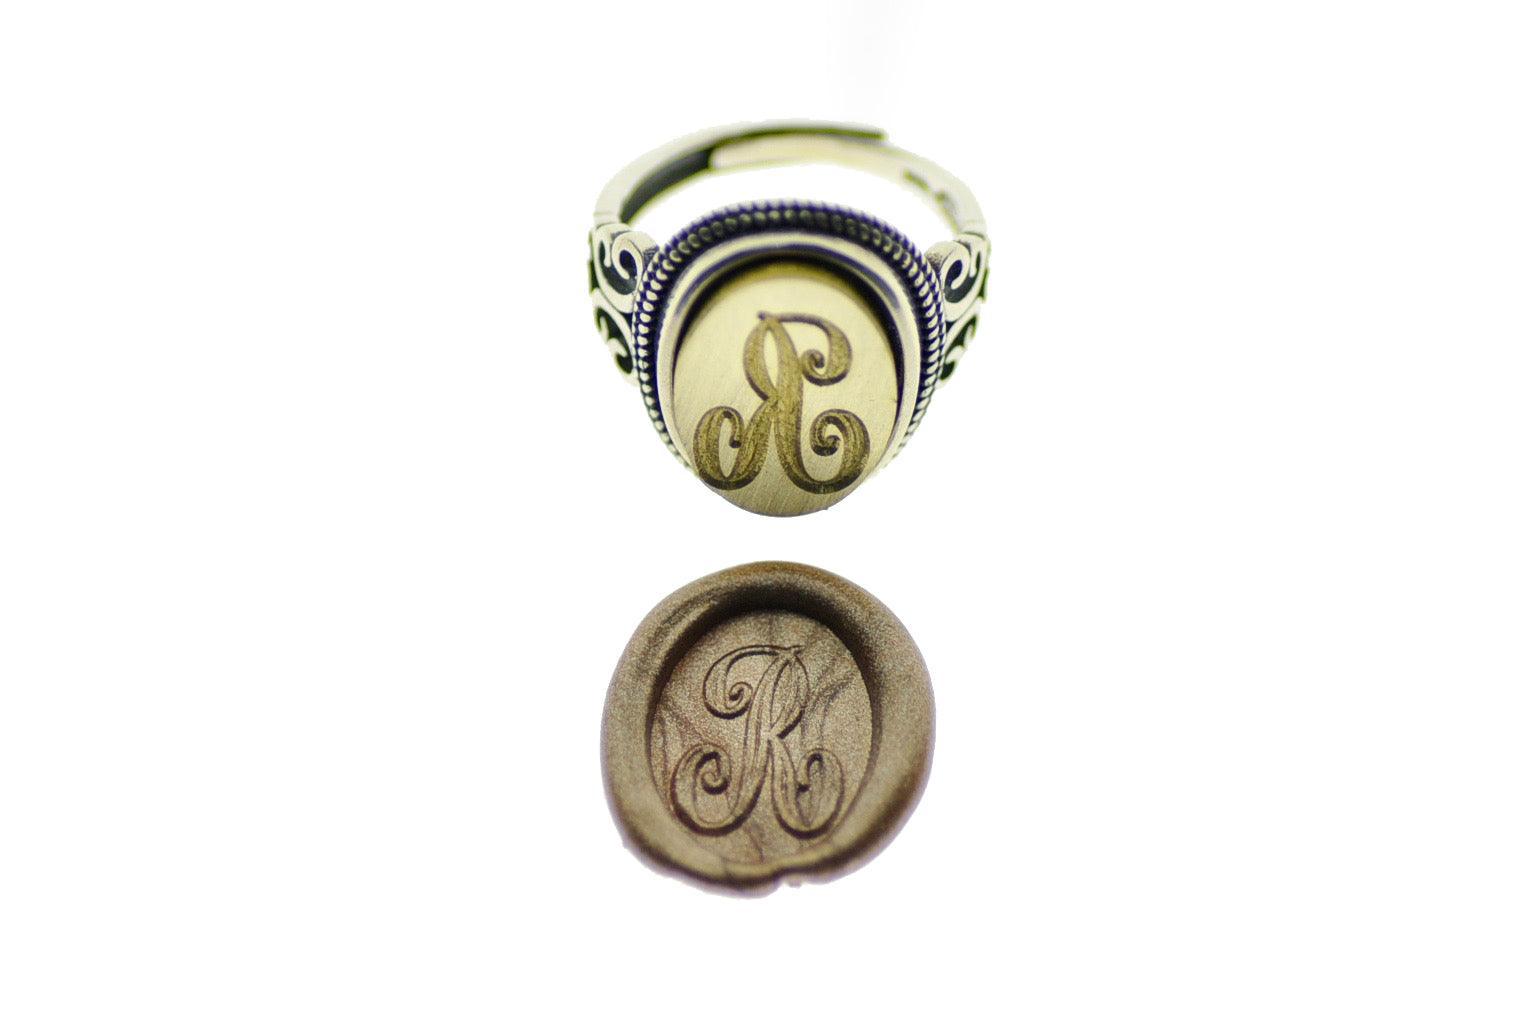 Calligraphy Initial Signet Ring - Backtozero B20 - 1 initial, 1216f, 12x16mm, 12x16mm ring, 1initial, accessory, bespoke, Custom, her, him, Initial, jewelry, Letter, One Initial, oval, oval ring, ring, signet ring, size 10, size 11, size 6, size 7, size 8, size 9, wax seal, wax seal stamp